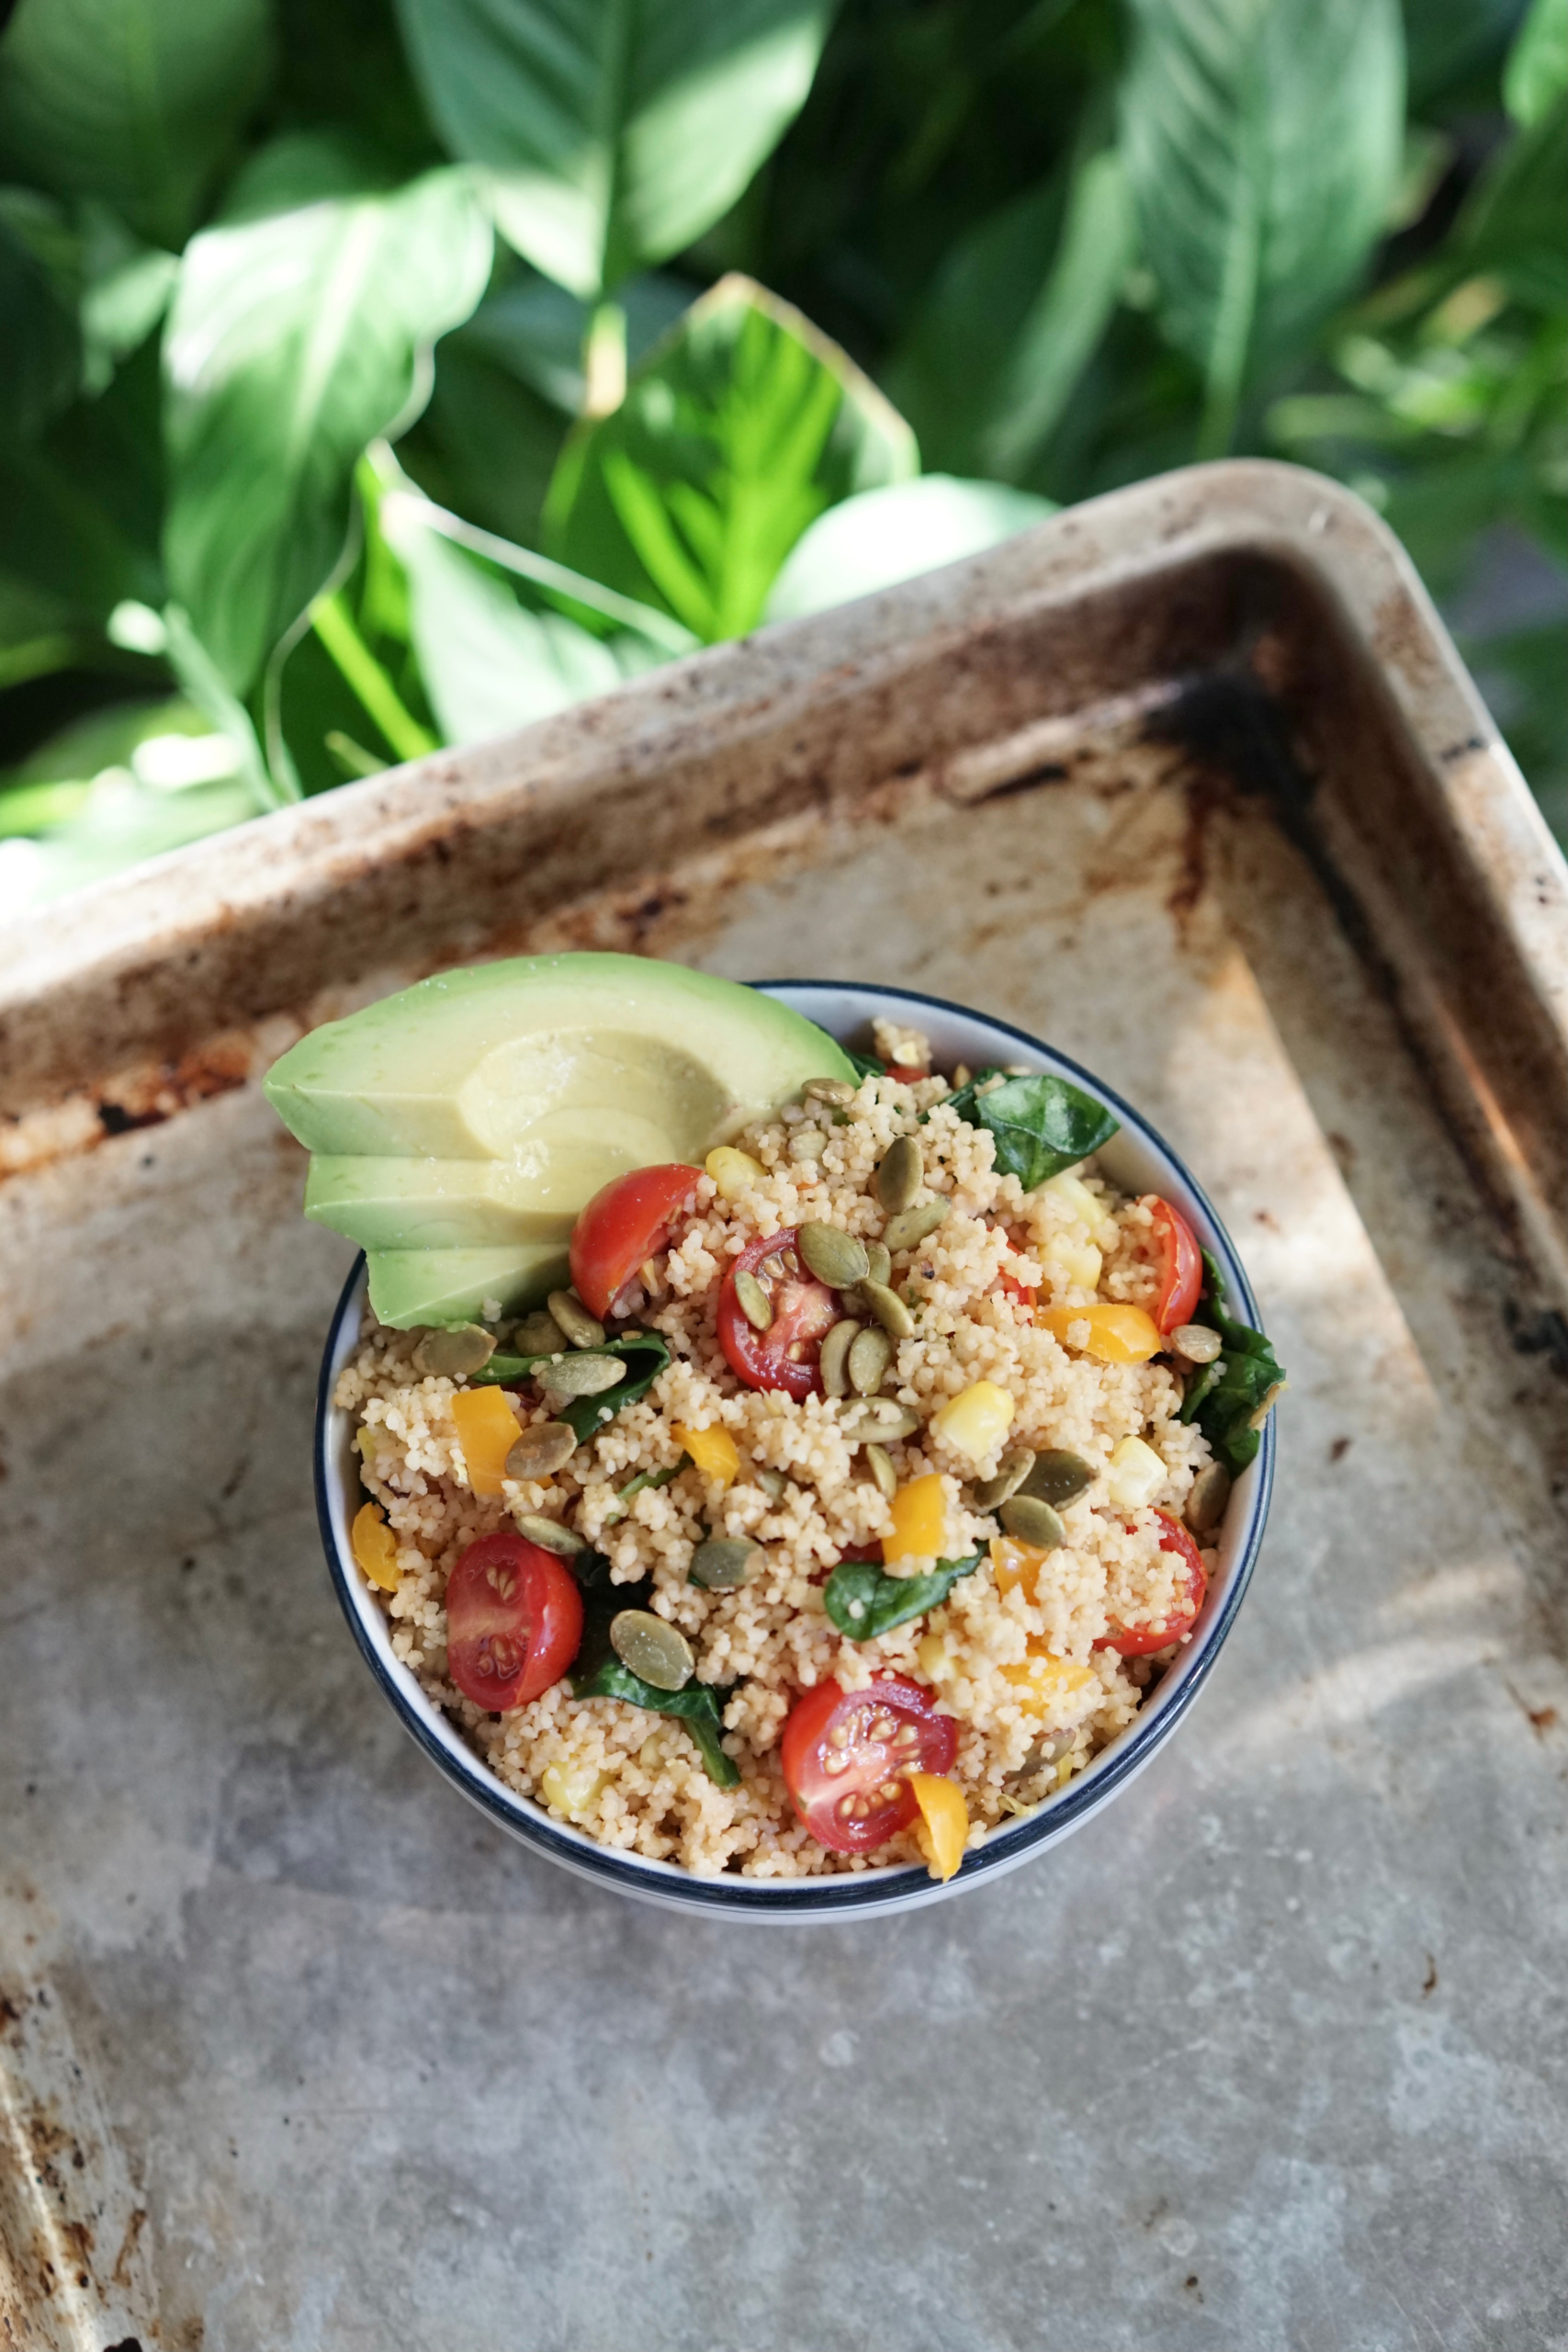 Couscous with Summer Veggies, Avocado & Hummus | Living Healthy in Seattle